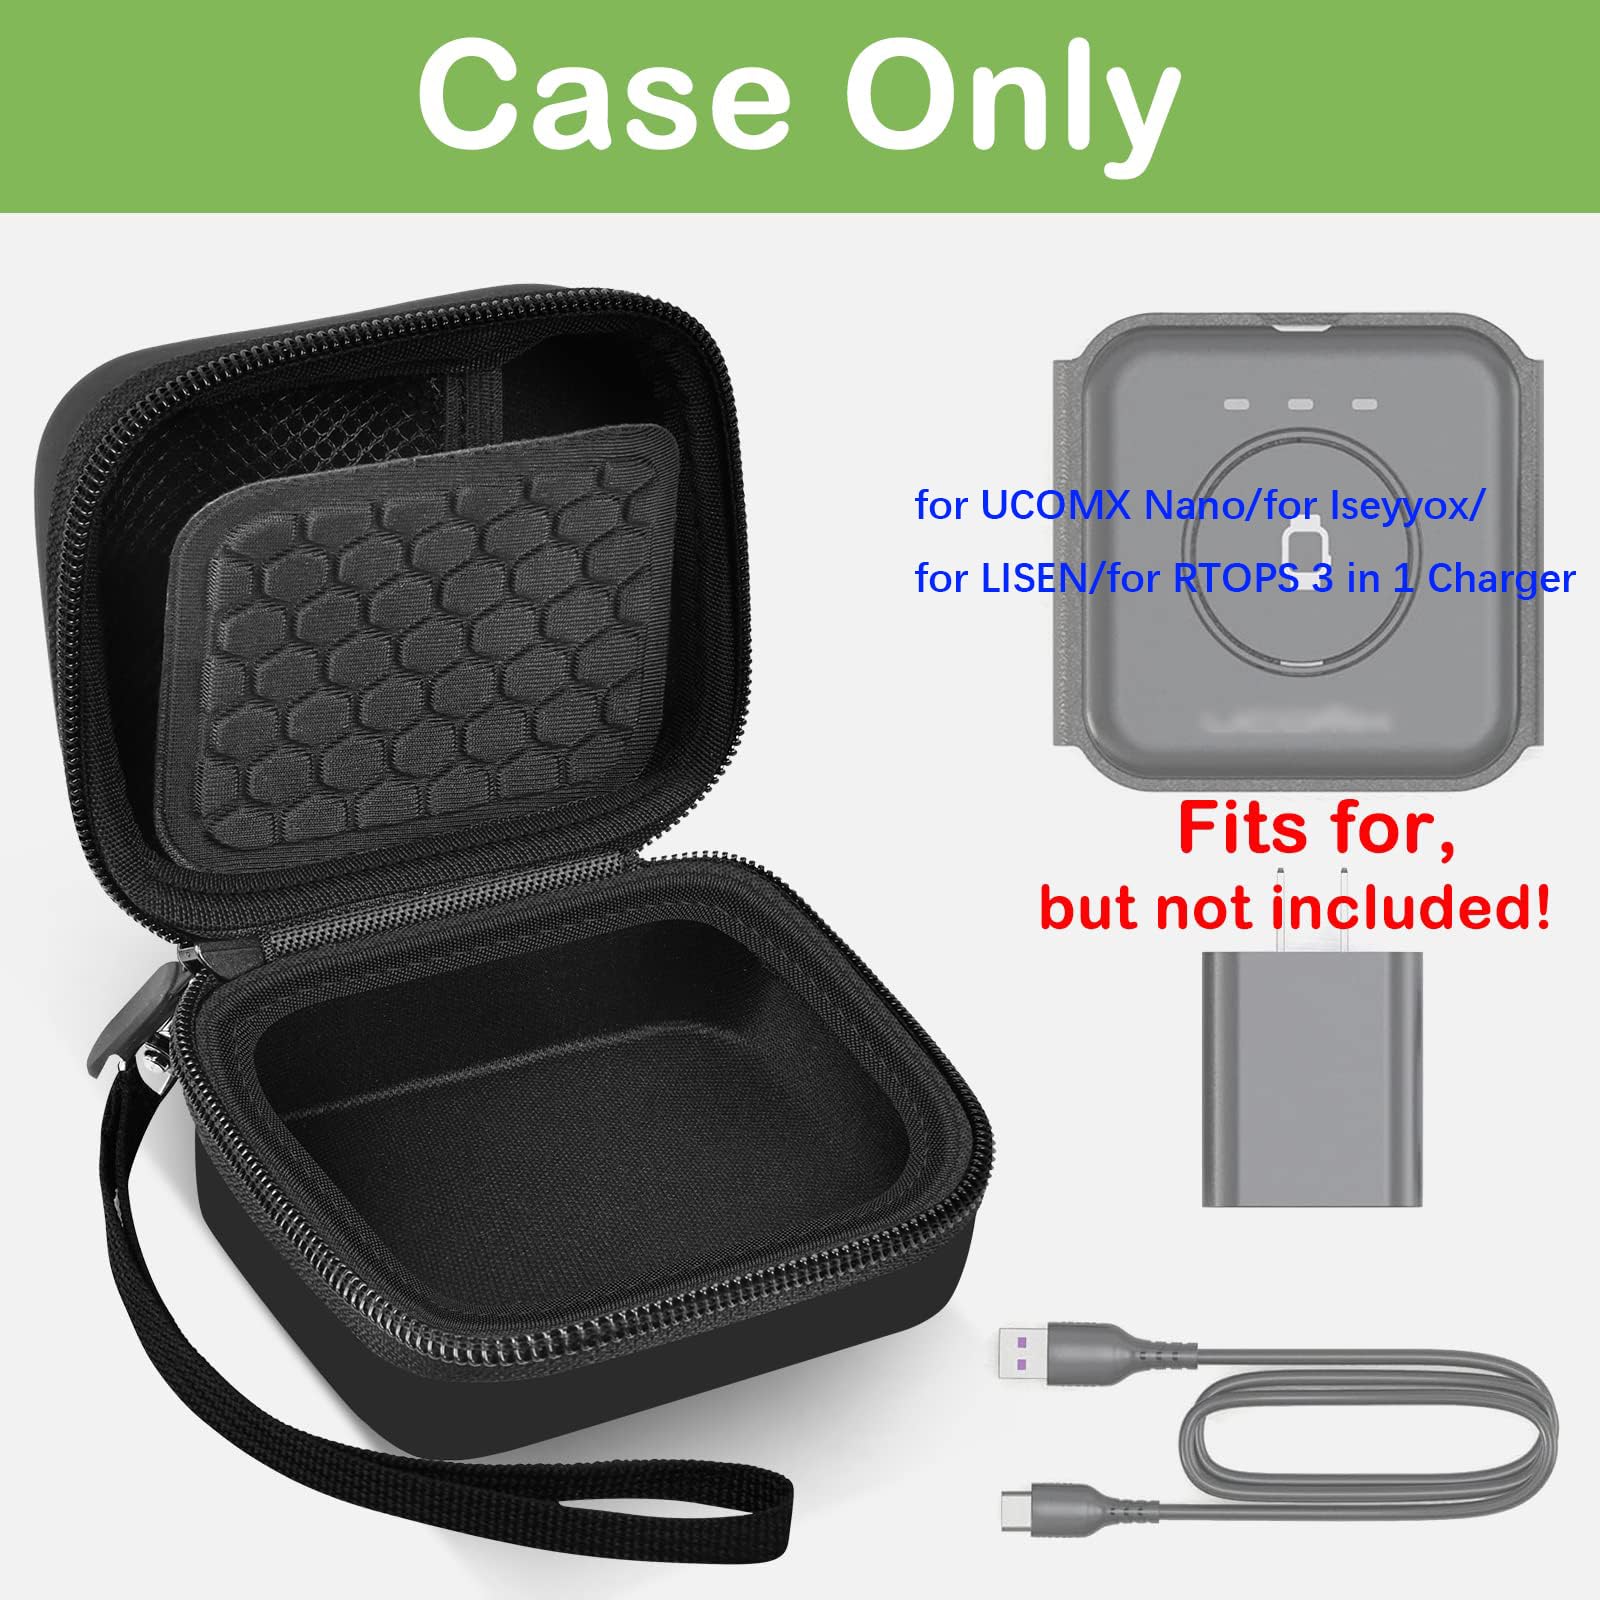 Carrying Case for UCOMX Nano 3 in 1 Wireless Charger, Storage Holder for Iseyyox/for LISEN/for RTOPS and More Foldable Magnetic Charging Station Travel Fast Chargers Adapter (Black)